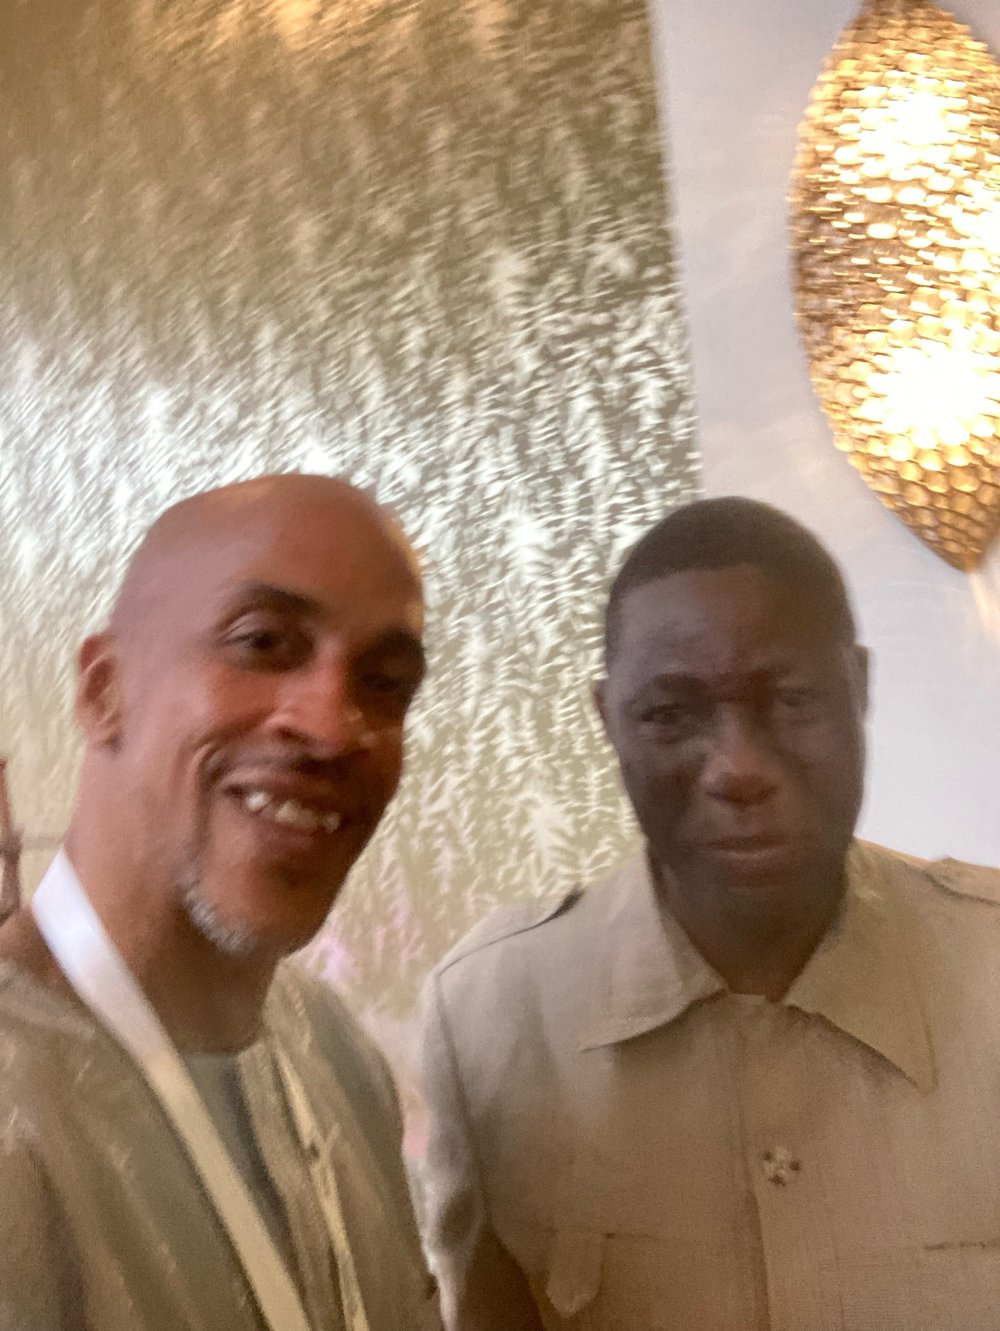 With Dr. Jimni Adisa, Director CIDO and Head of ECOSOCC at the African Union